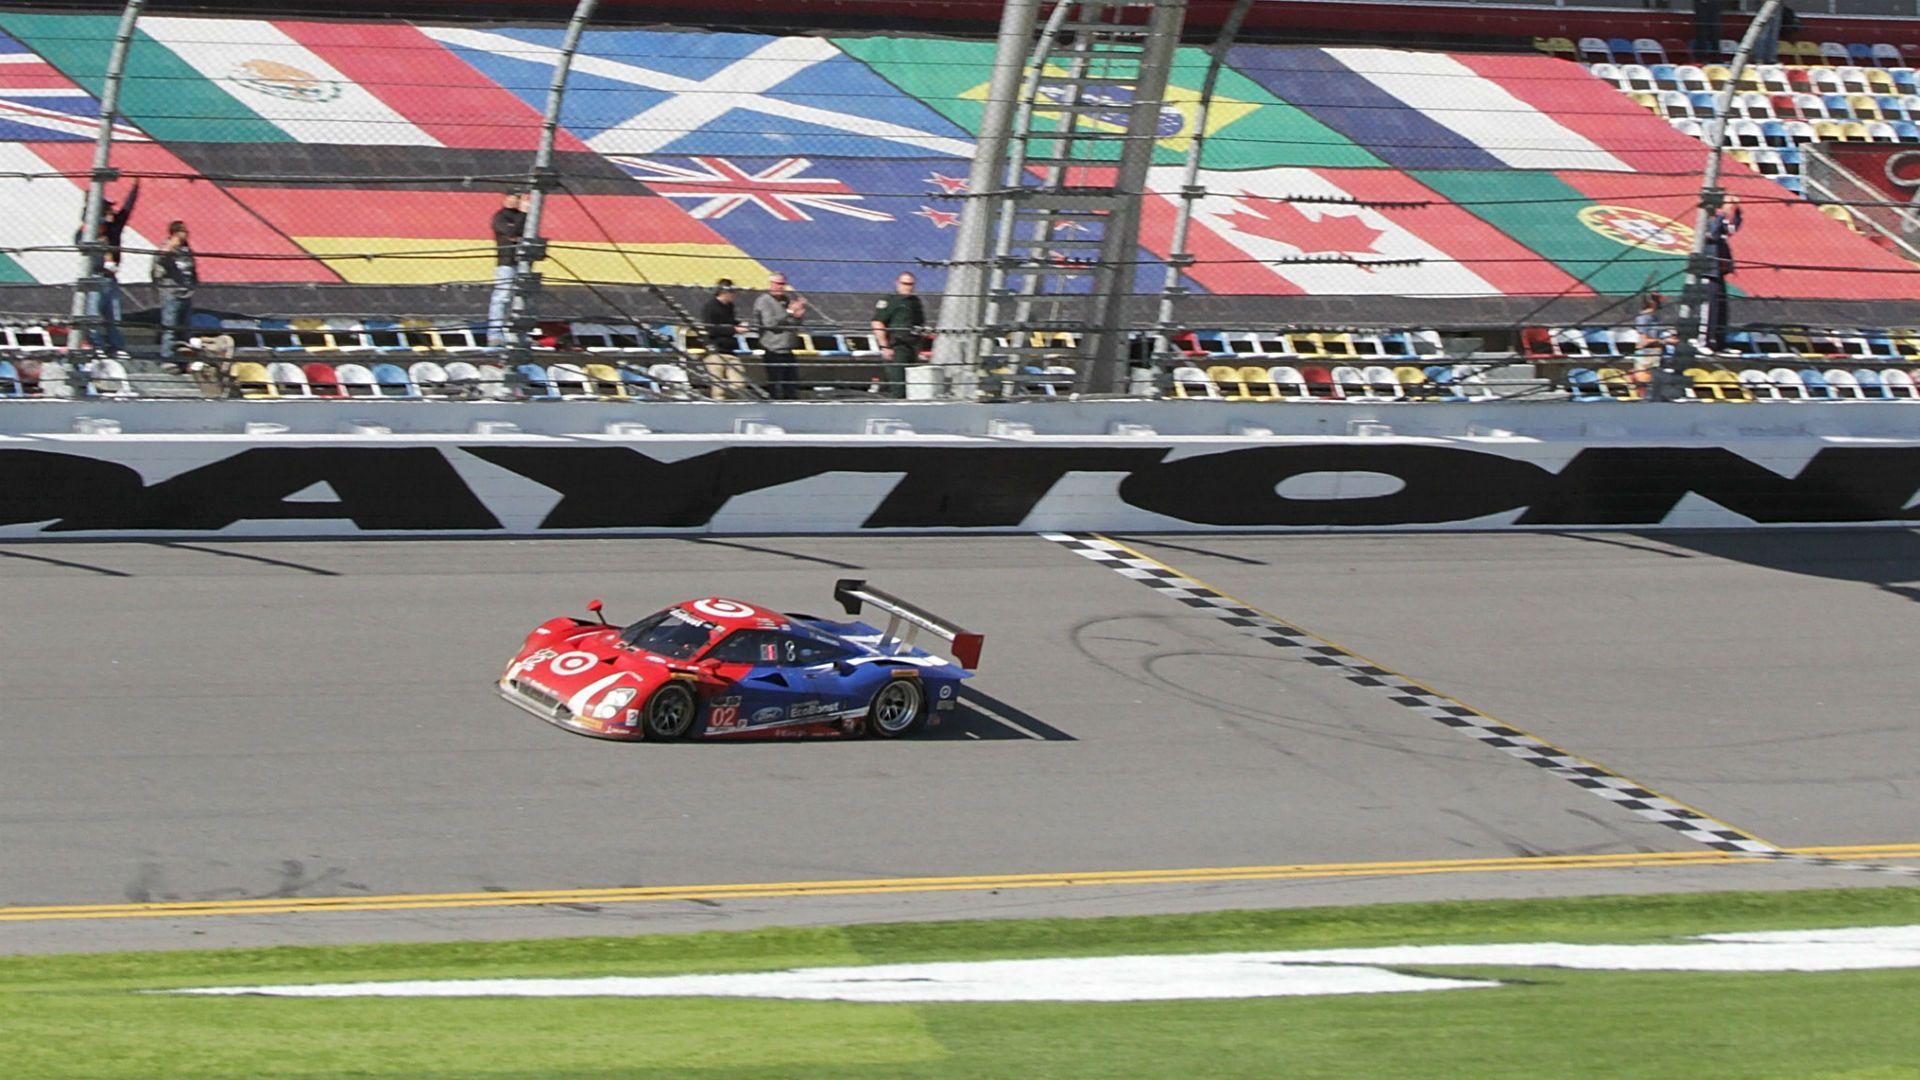 Rolex 24 at Daytona: Rules, drivers to watch, TV schedule